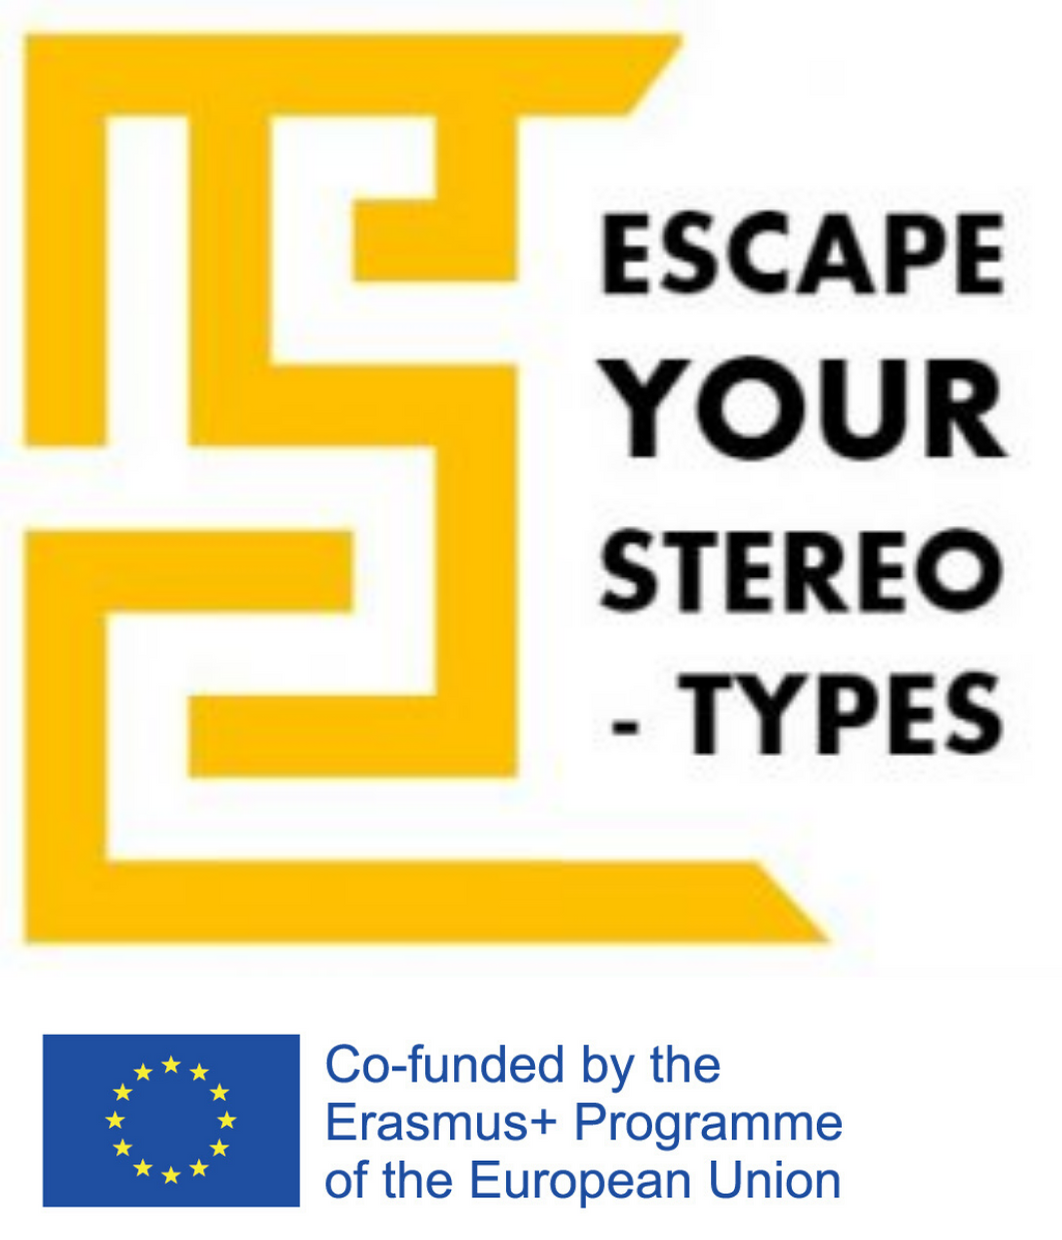 Logo Escape Your Stereotypes Project co-funded by the Erasmus+ Programme of the European Union. The goal of Escape your Stereotypes project is to create an educational escape game focused on interculturality and the fight against prejudices and stereotypes. Escape your Stereotypes project is supported by the Erasmus+ programme of the European Commission.